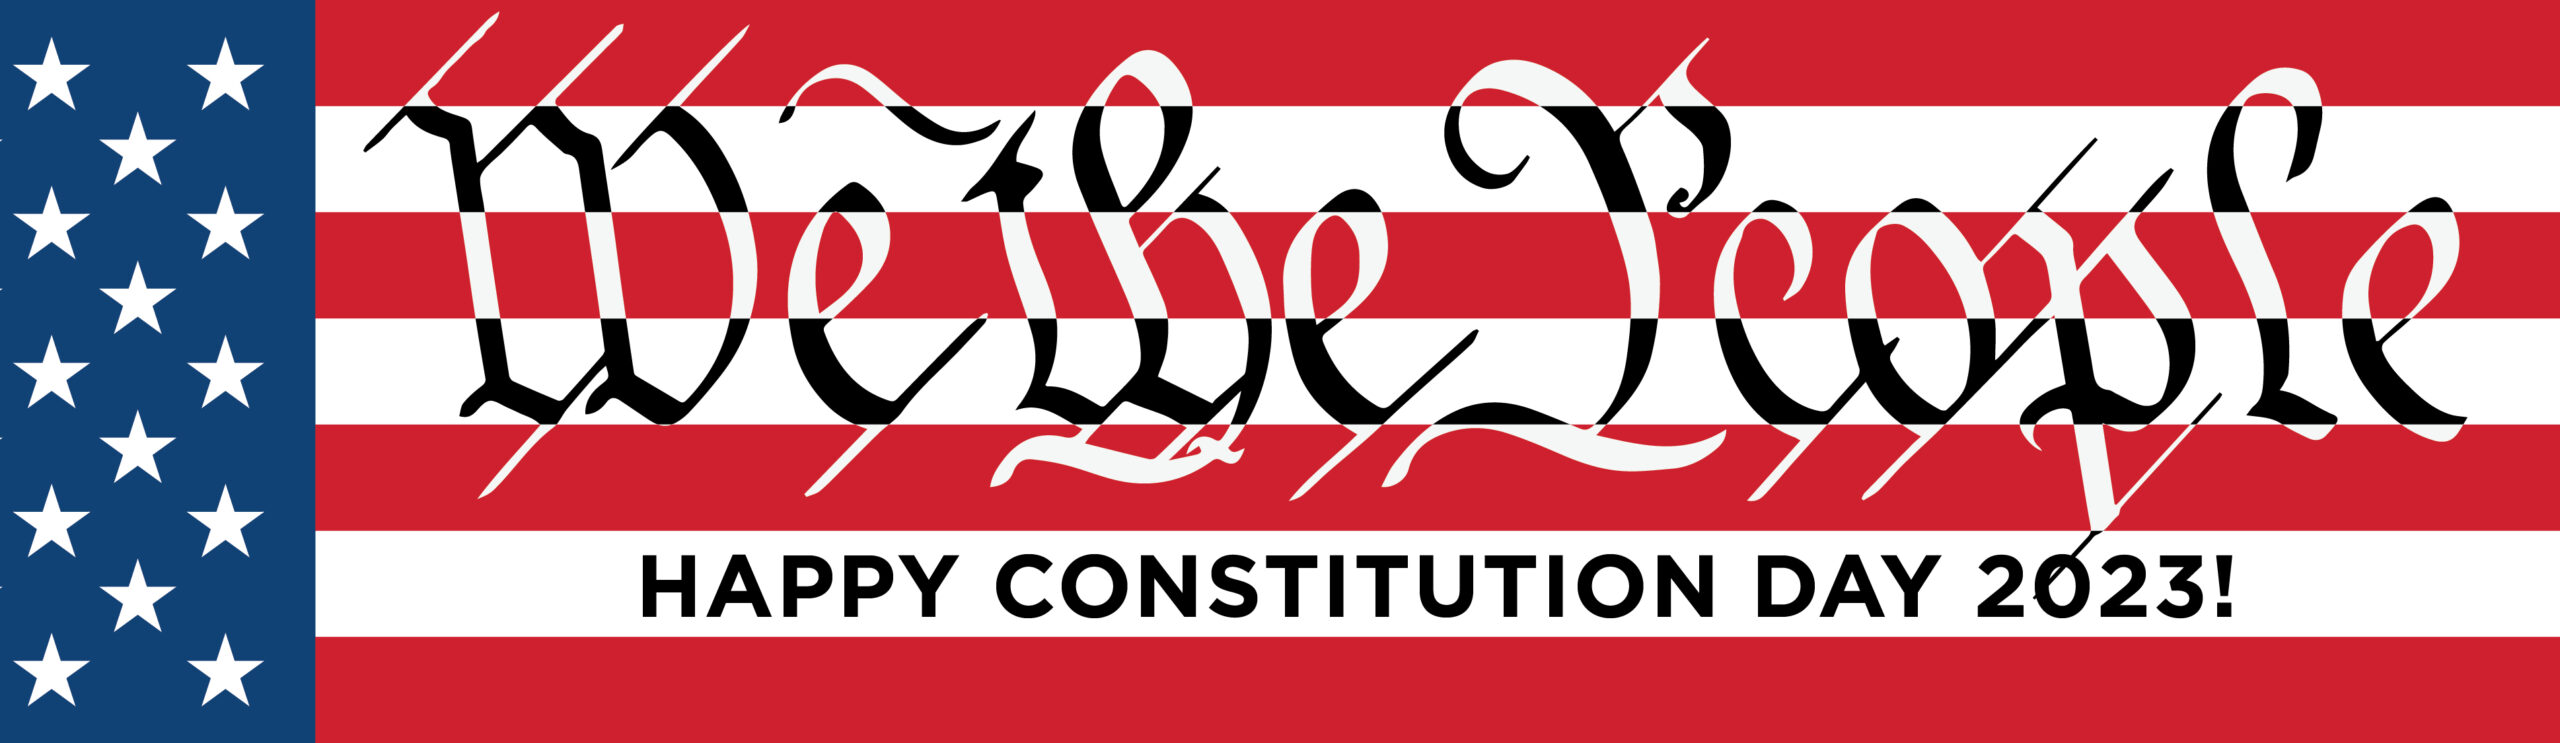 Constitution day 2023